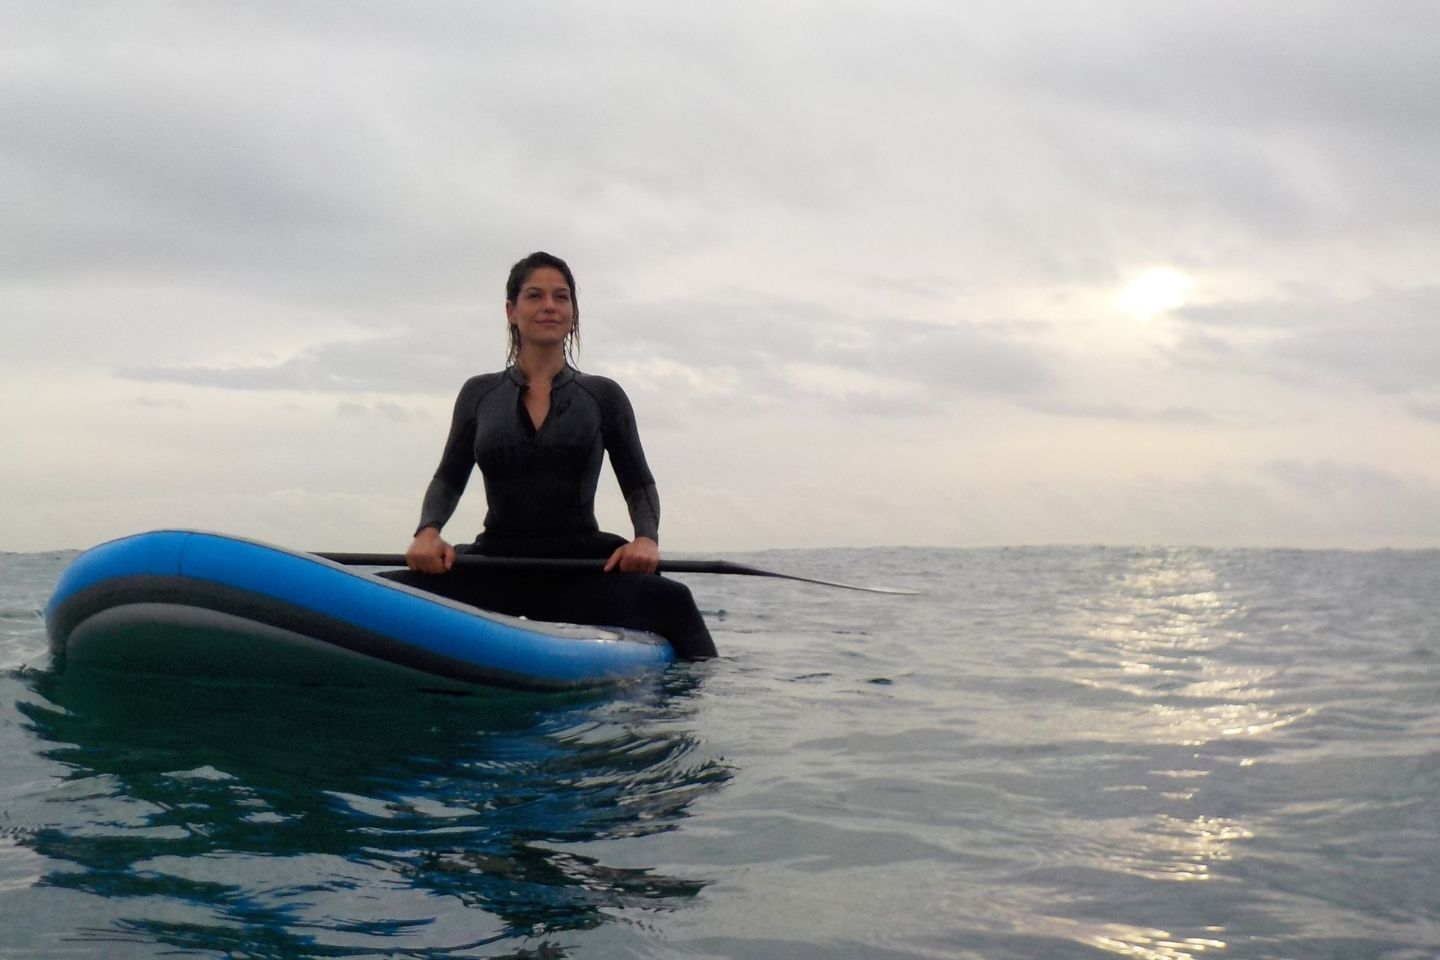 A woman in a wetsuit on a blue paddle board